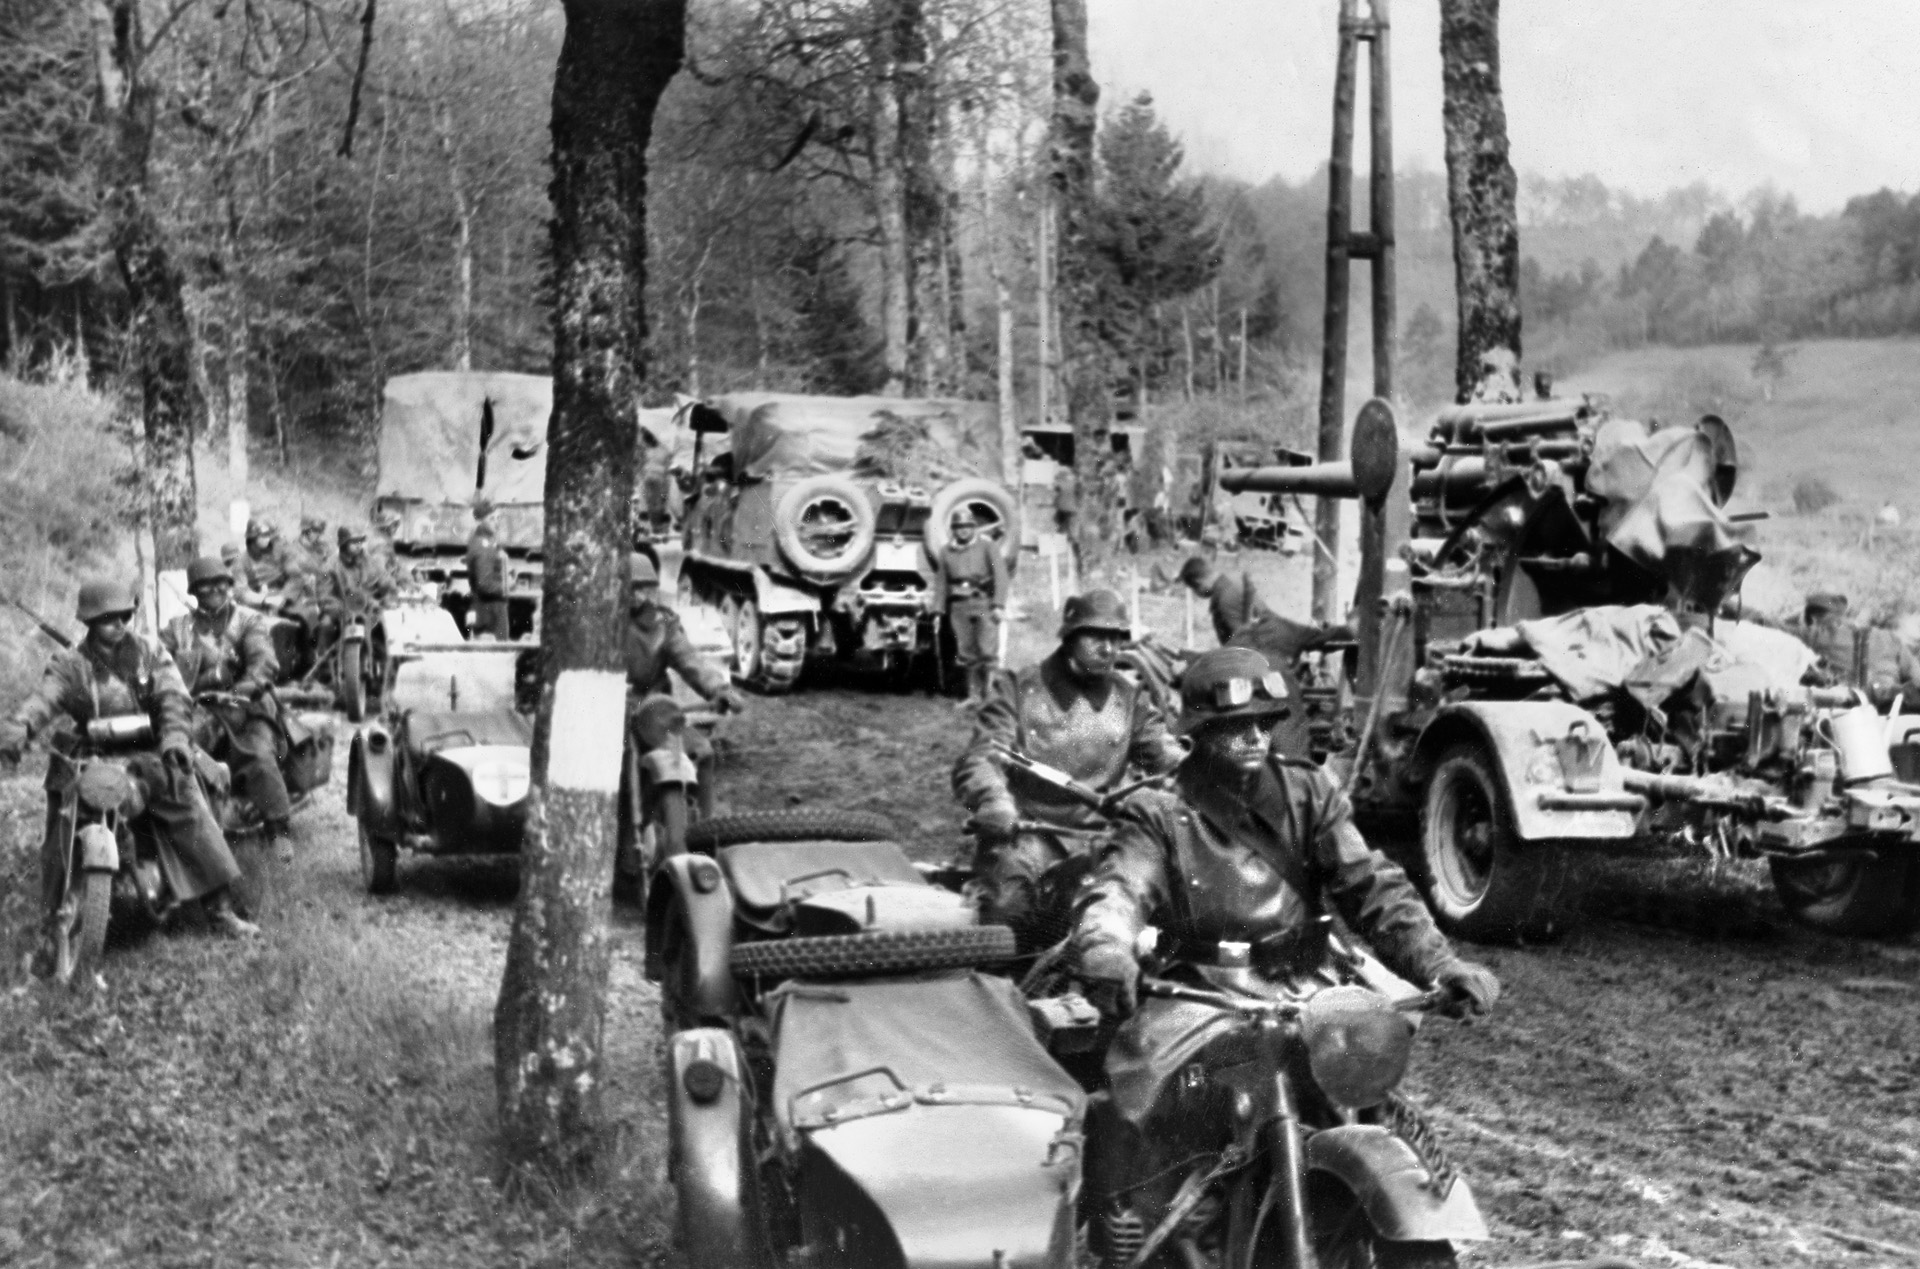 A German column, including armored and motorized vehicles, pauses momentarily as it penetrates the dense Ardennes Forest during the opening days of the attack. Allied planners before the war considered the Ardennes impenetrable.